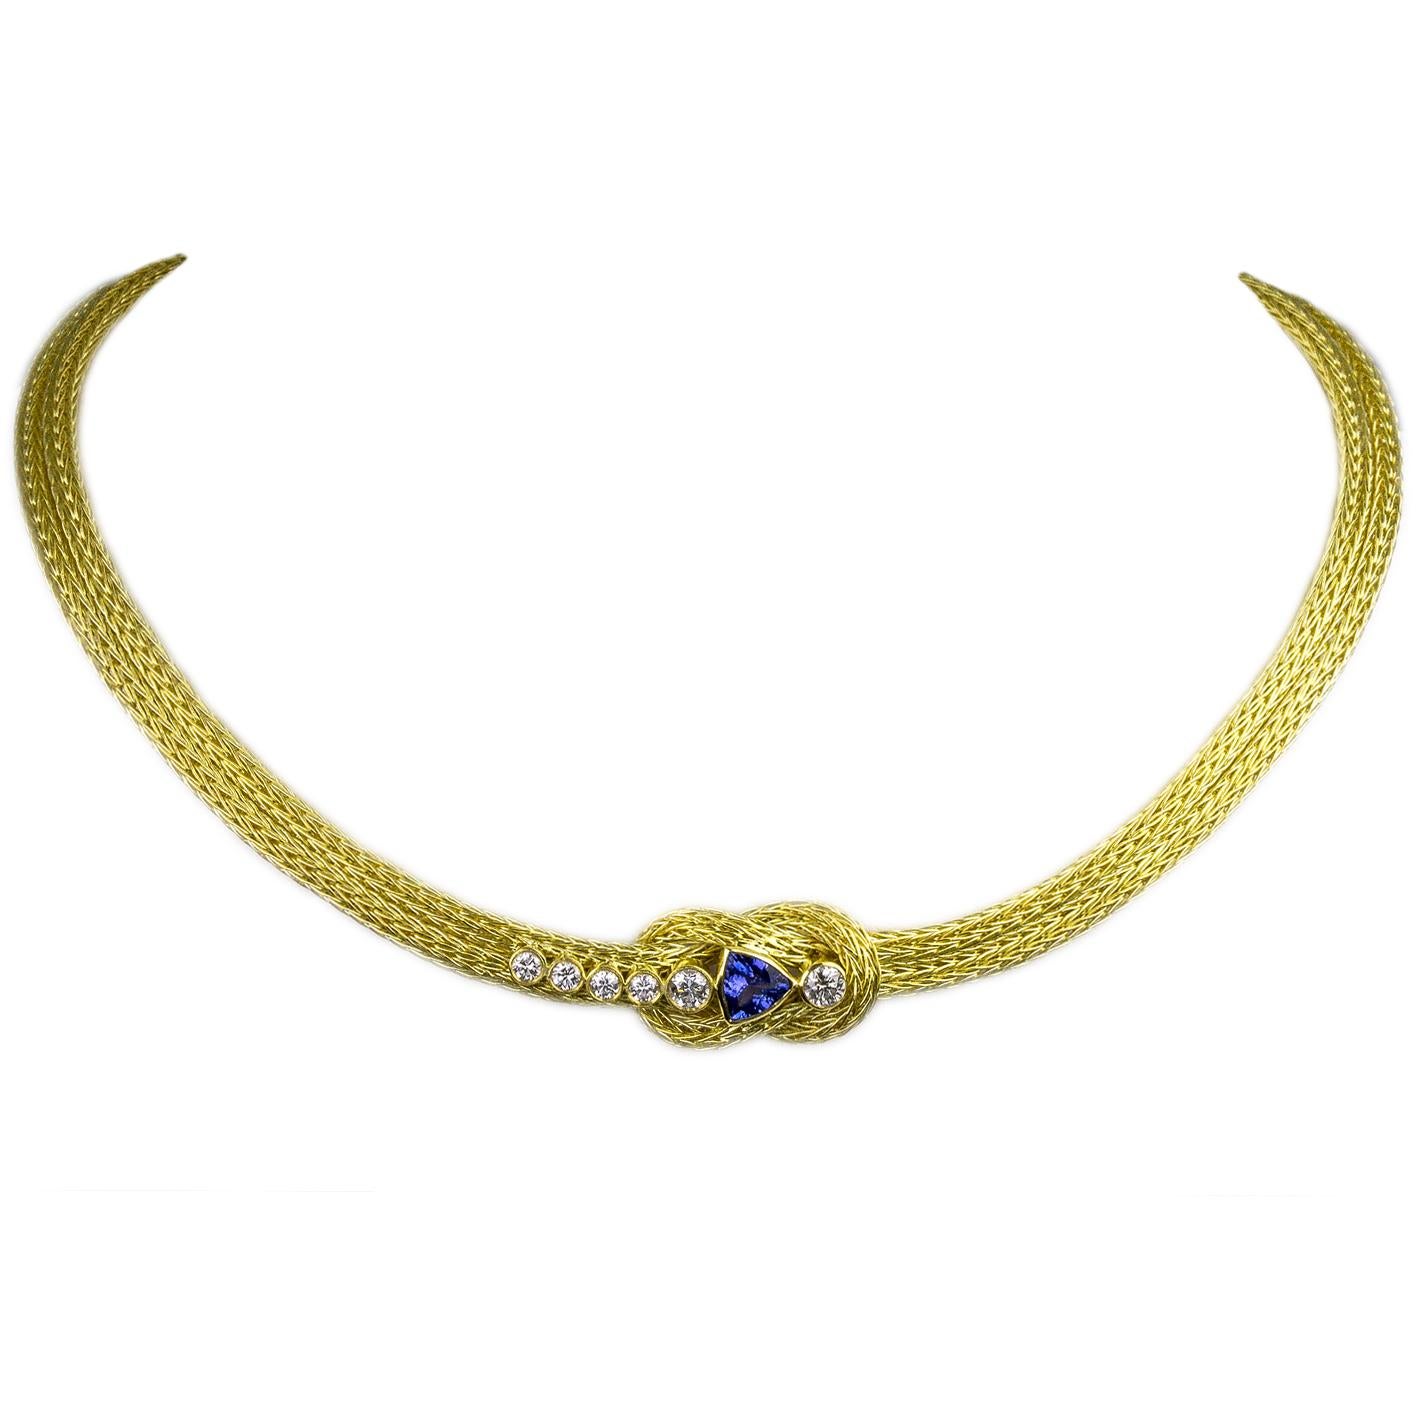 Luxurious and striking S.Georgios design rope necklace with Hercules Knot, Diamonds, and Tanzanite all custom made. The necklace is handknitted from in 18 Karat Yellow Gold in our workshop in Greece and decorated with 6 Brilliant cut White Diamonds,